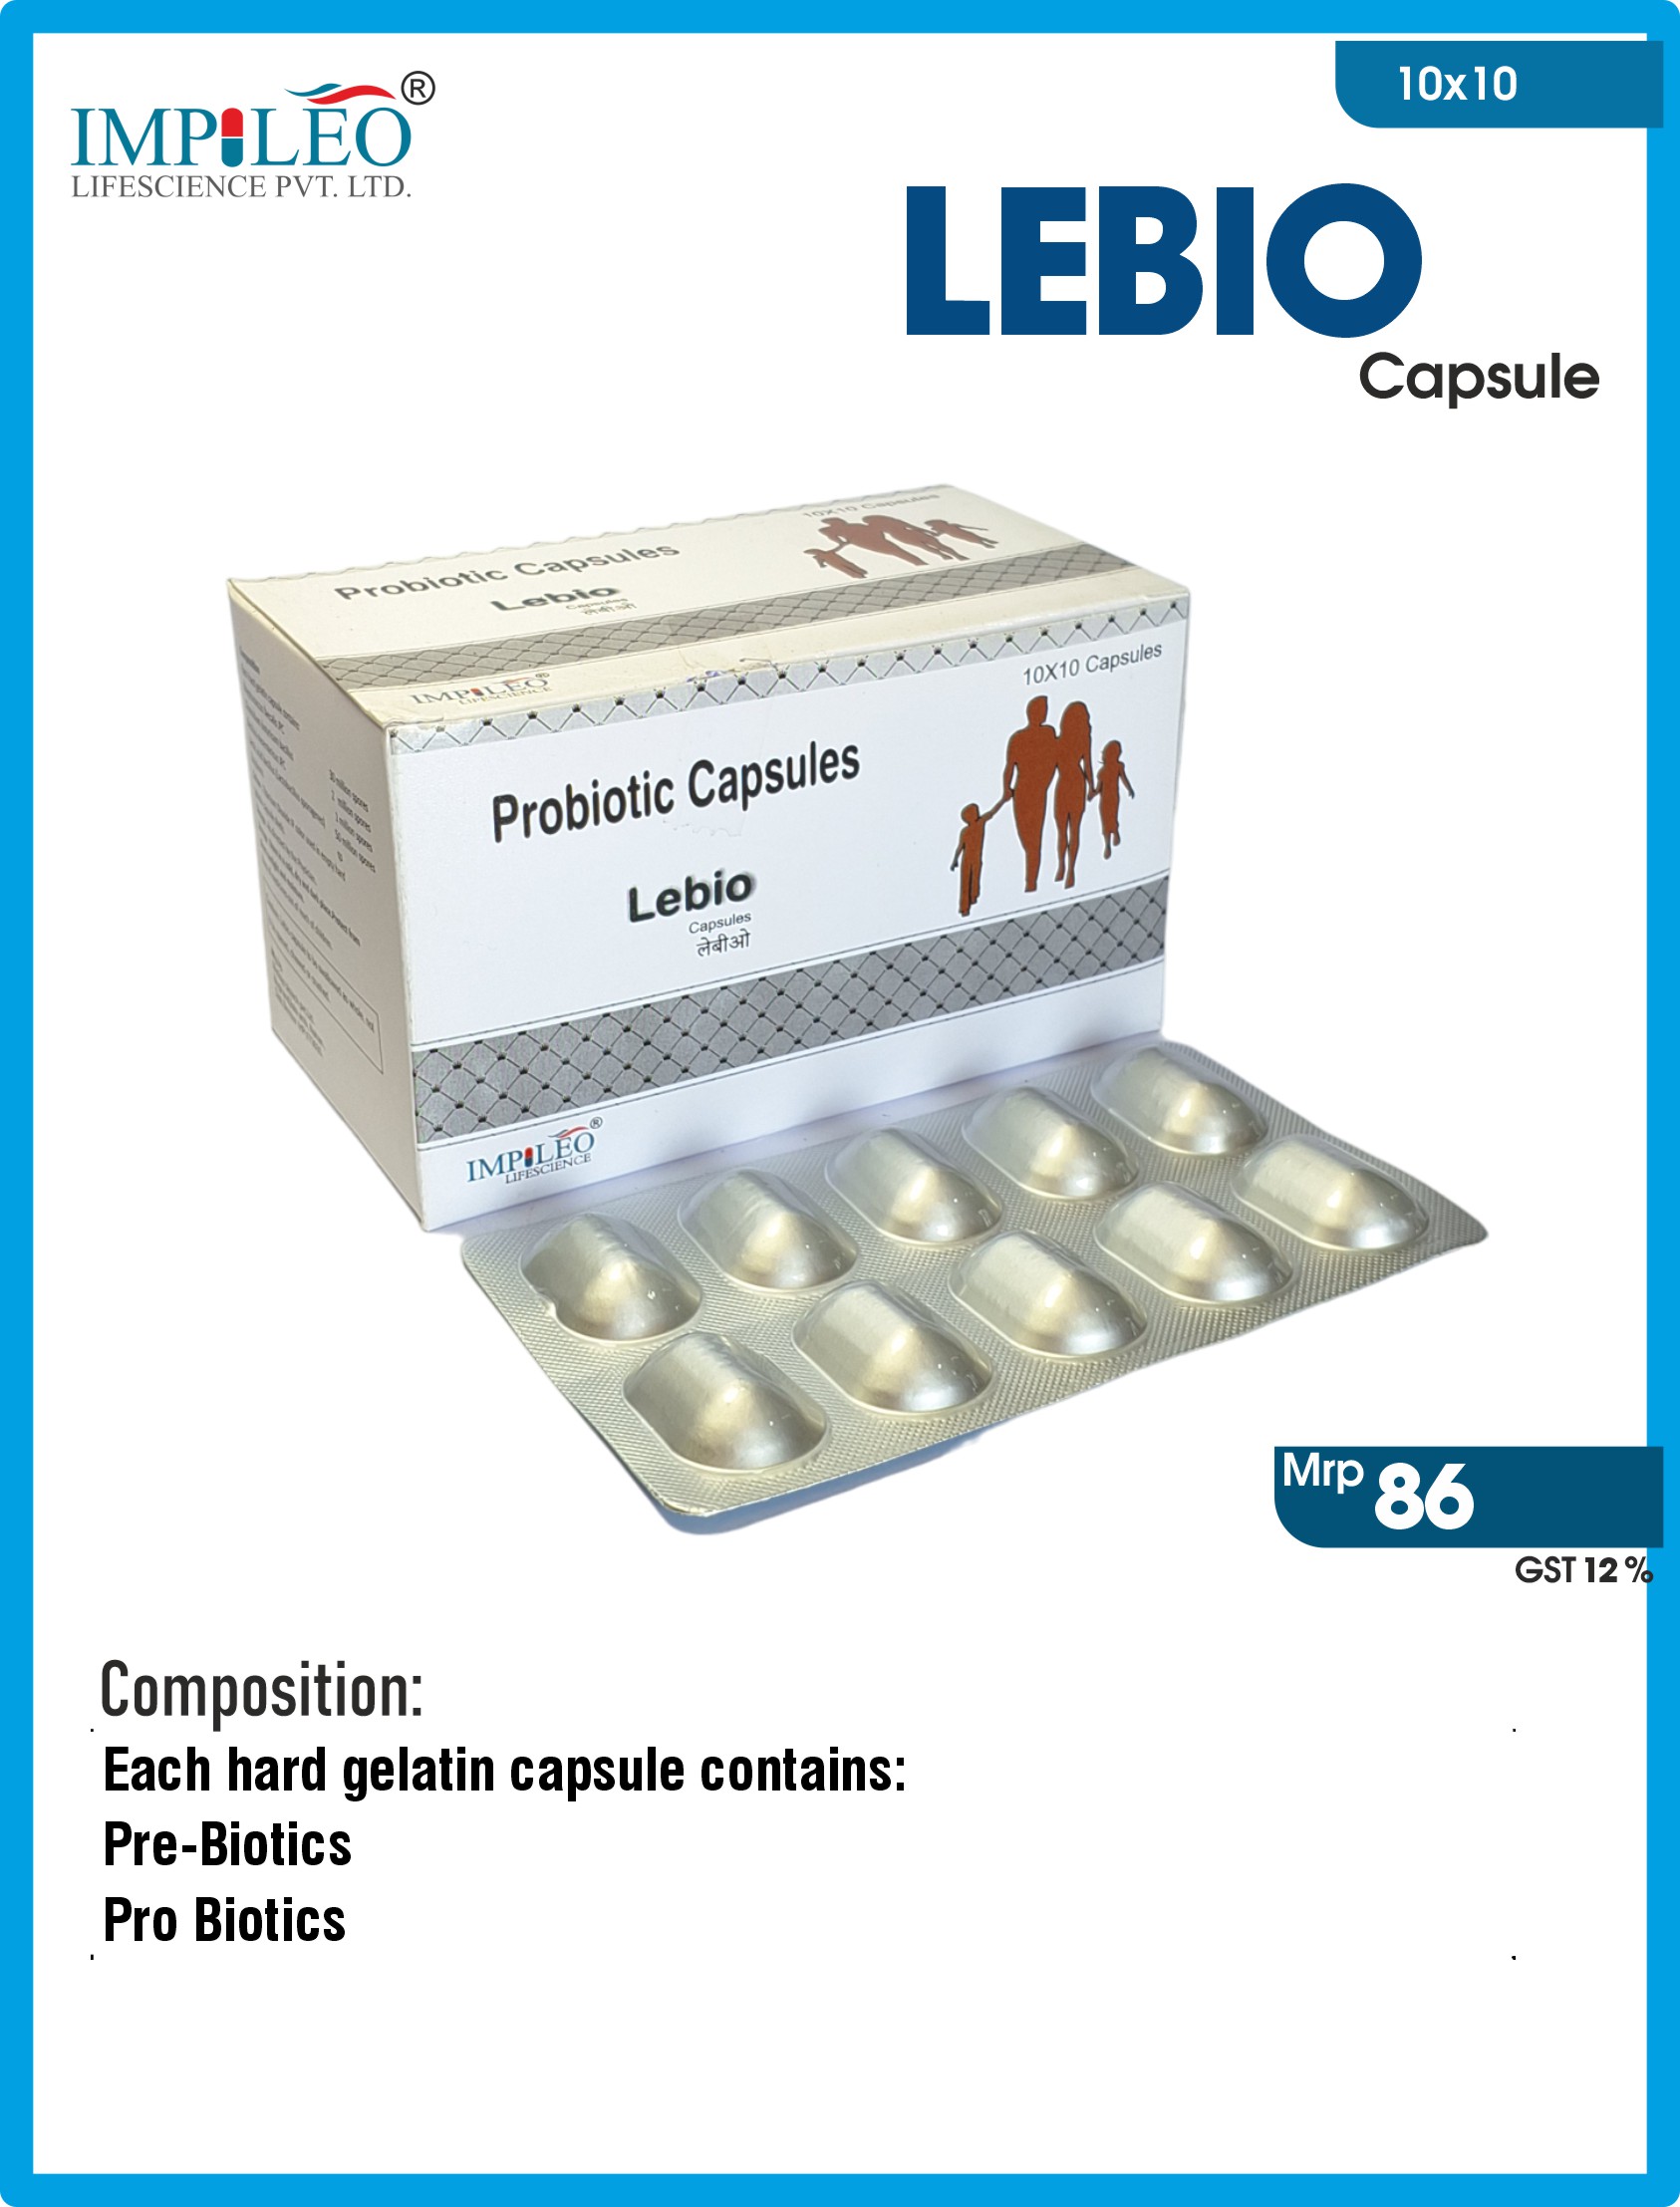 Expand Your Business: PCD Pharma Franchise in Chandigarh for LEBIO Capsule